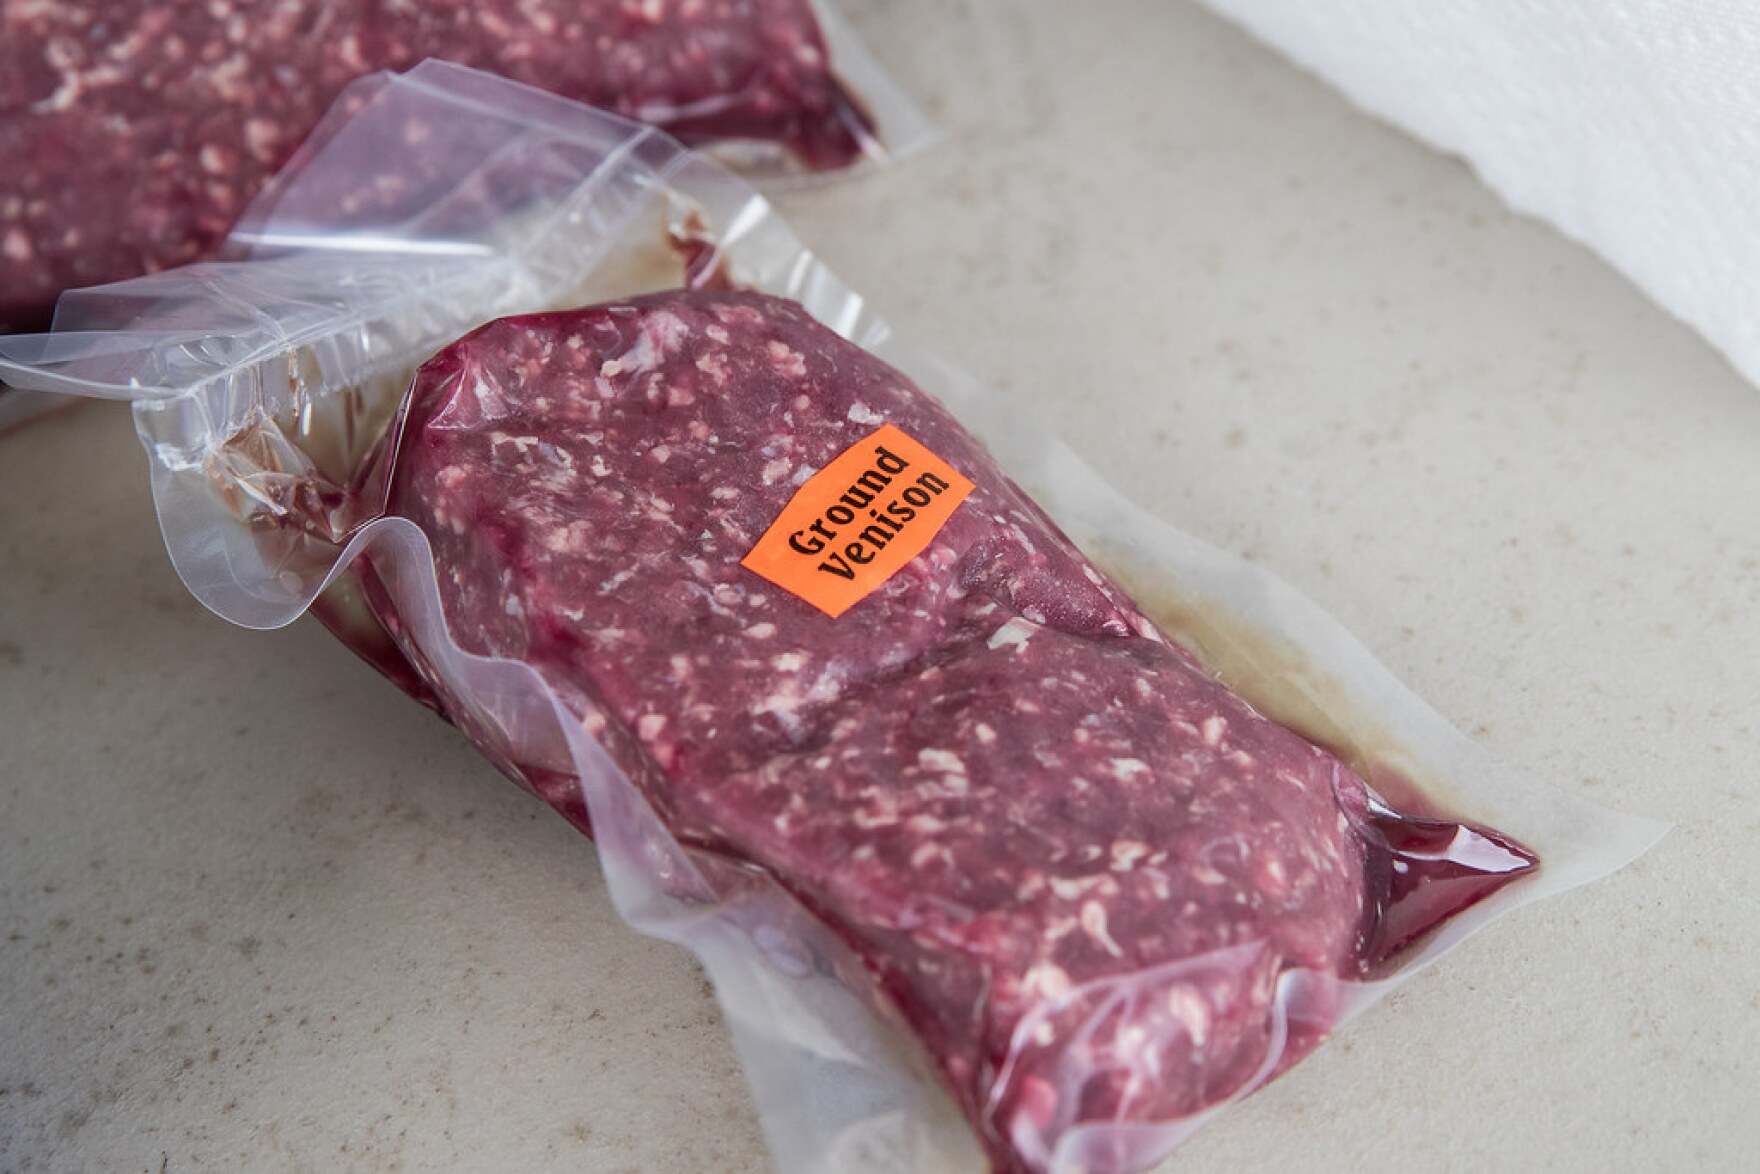 A package of raw ground venison.